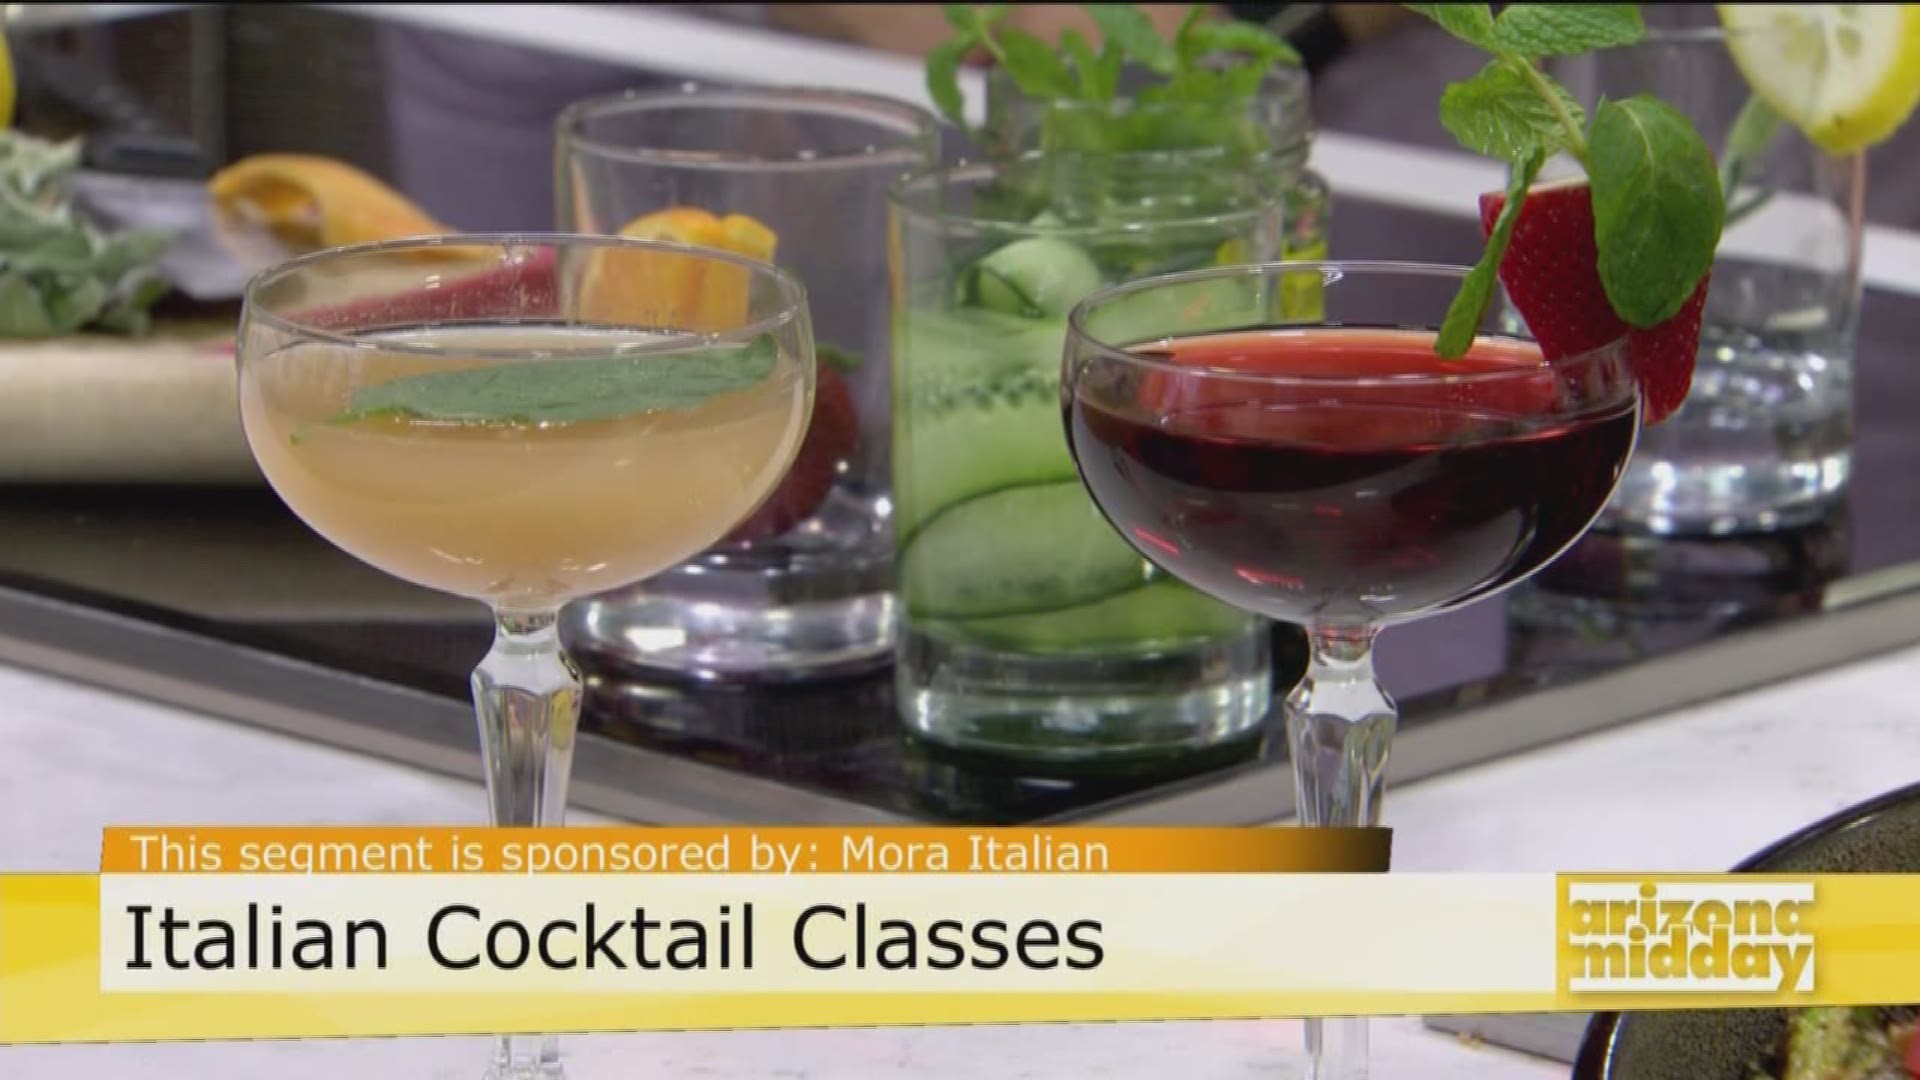 Christina Arellano with Mora Italian shows us some delicious Italian drinks and tells us about the class where you can learn the cocktail making secrets